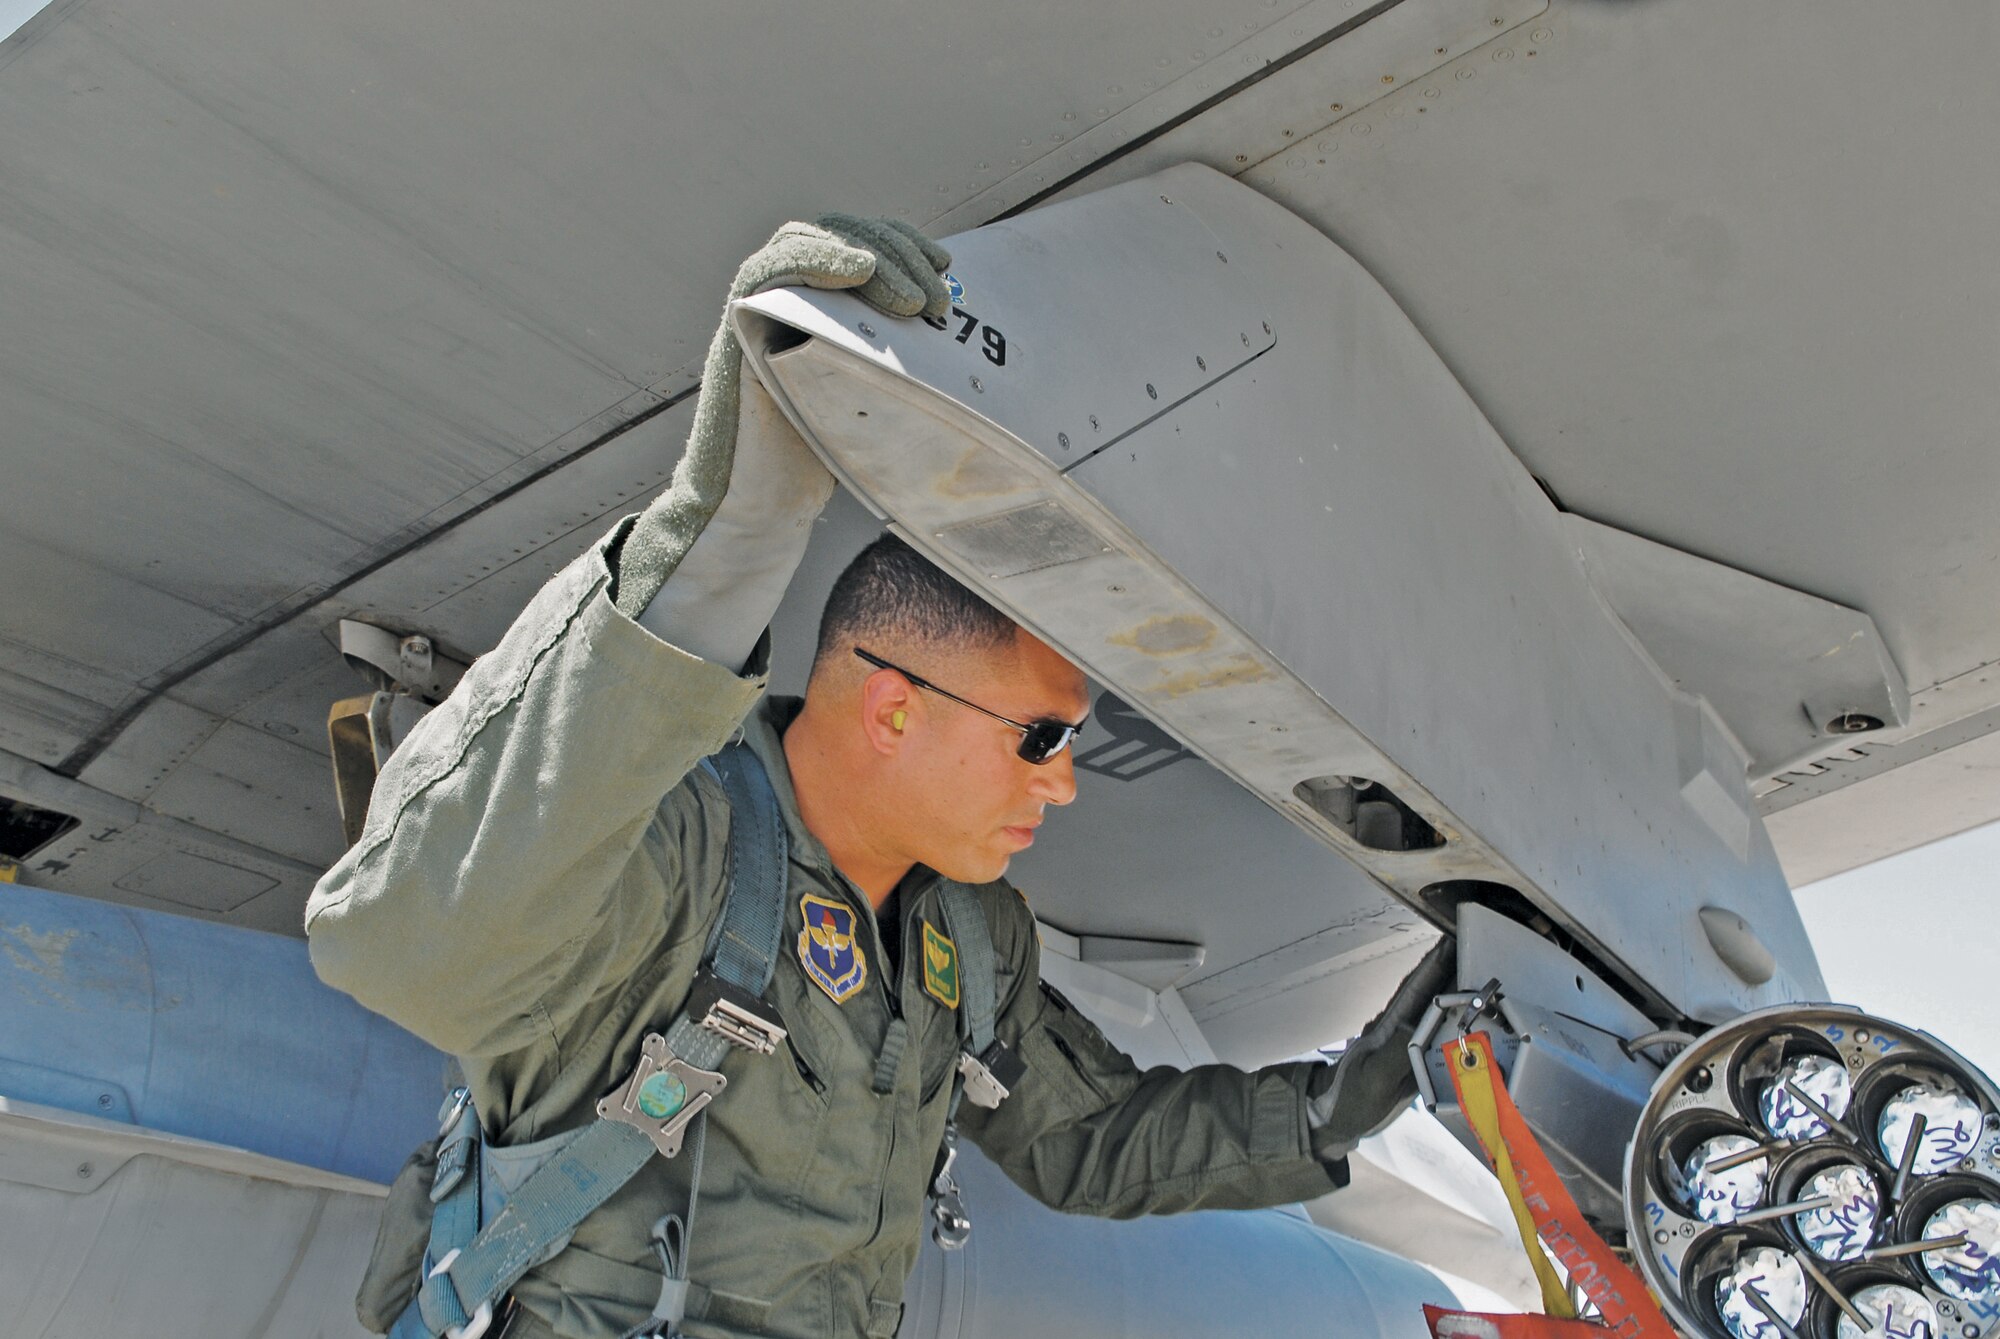 Maj. Tom Juntunen, 310th Fighter Squadron instructor pilot with more than 1,500 flying hours in the F-16 Fighting Falcon, conducts a preflight inspection before taking off to participate in a close air support exercise Aug. 2 at Luke Air Force Base.  Juntunen's job is to certify a select number of F-16 pilots to be controllers in the sky.  With their training at Luke behind them, forward air controllers (airborne) or FAC(A)s prioritize battlefield targets and act as gatekeepers for U.S. Army commanders on the ground.  (U.S. Air Force photo by Senior Master Sgt. Larry Schneck)